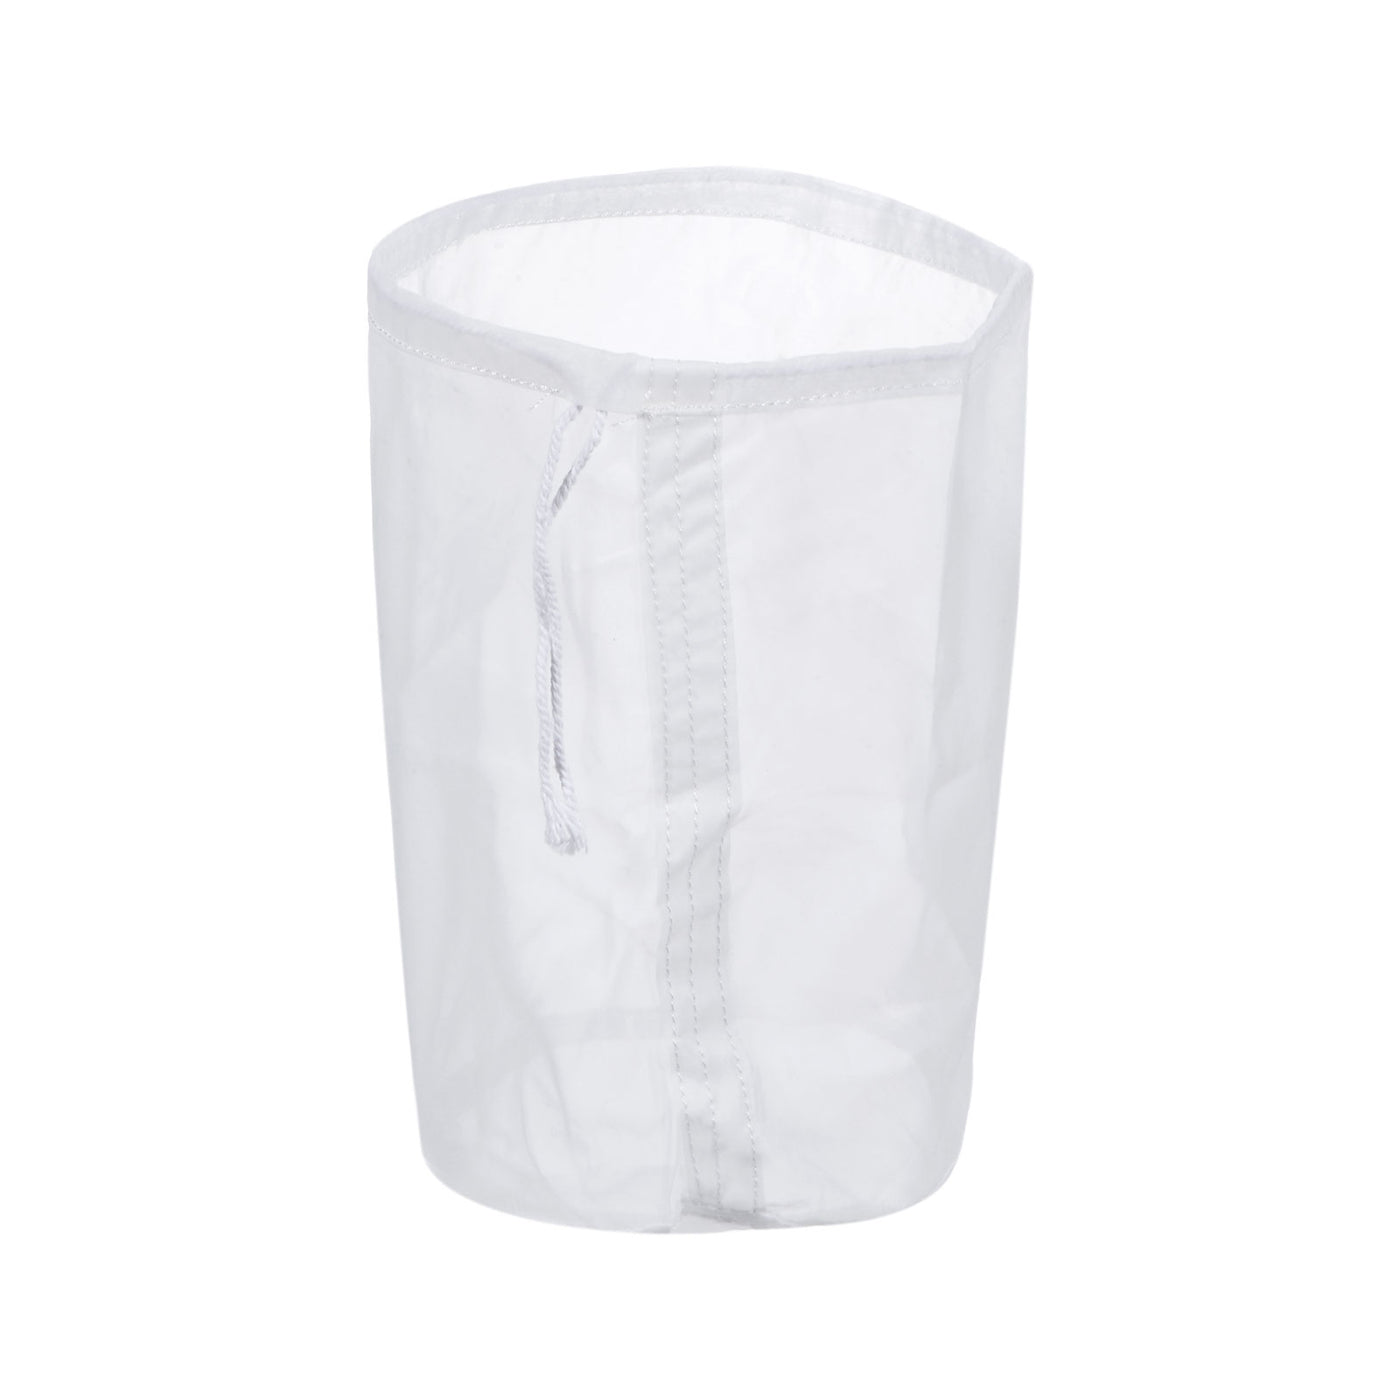 uxcell Uxcell 160 Mesh Paint Filter Bag 5.9" Dia Nylon Strainer with Drawstring for Filtering